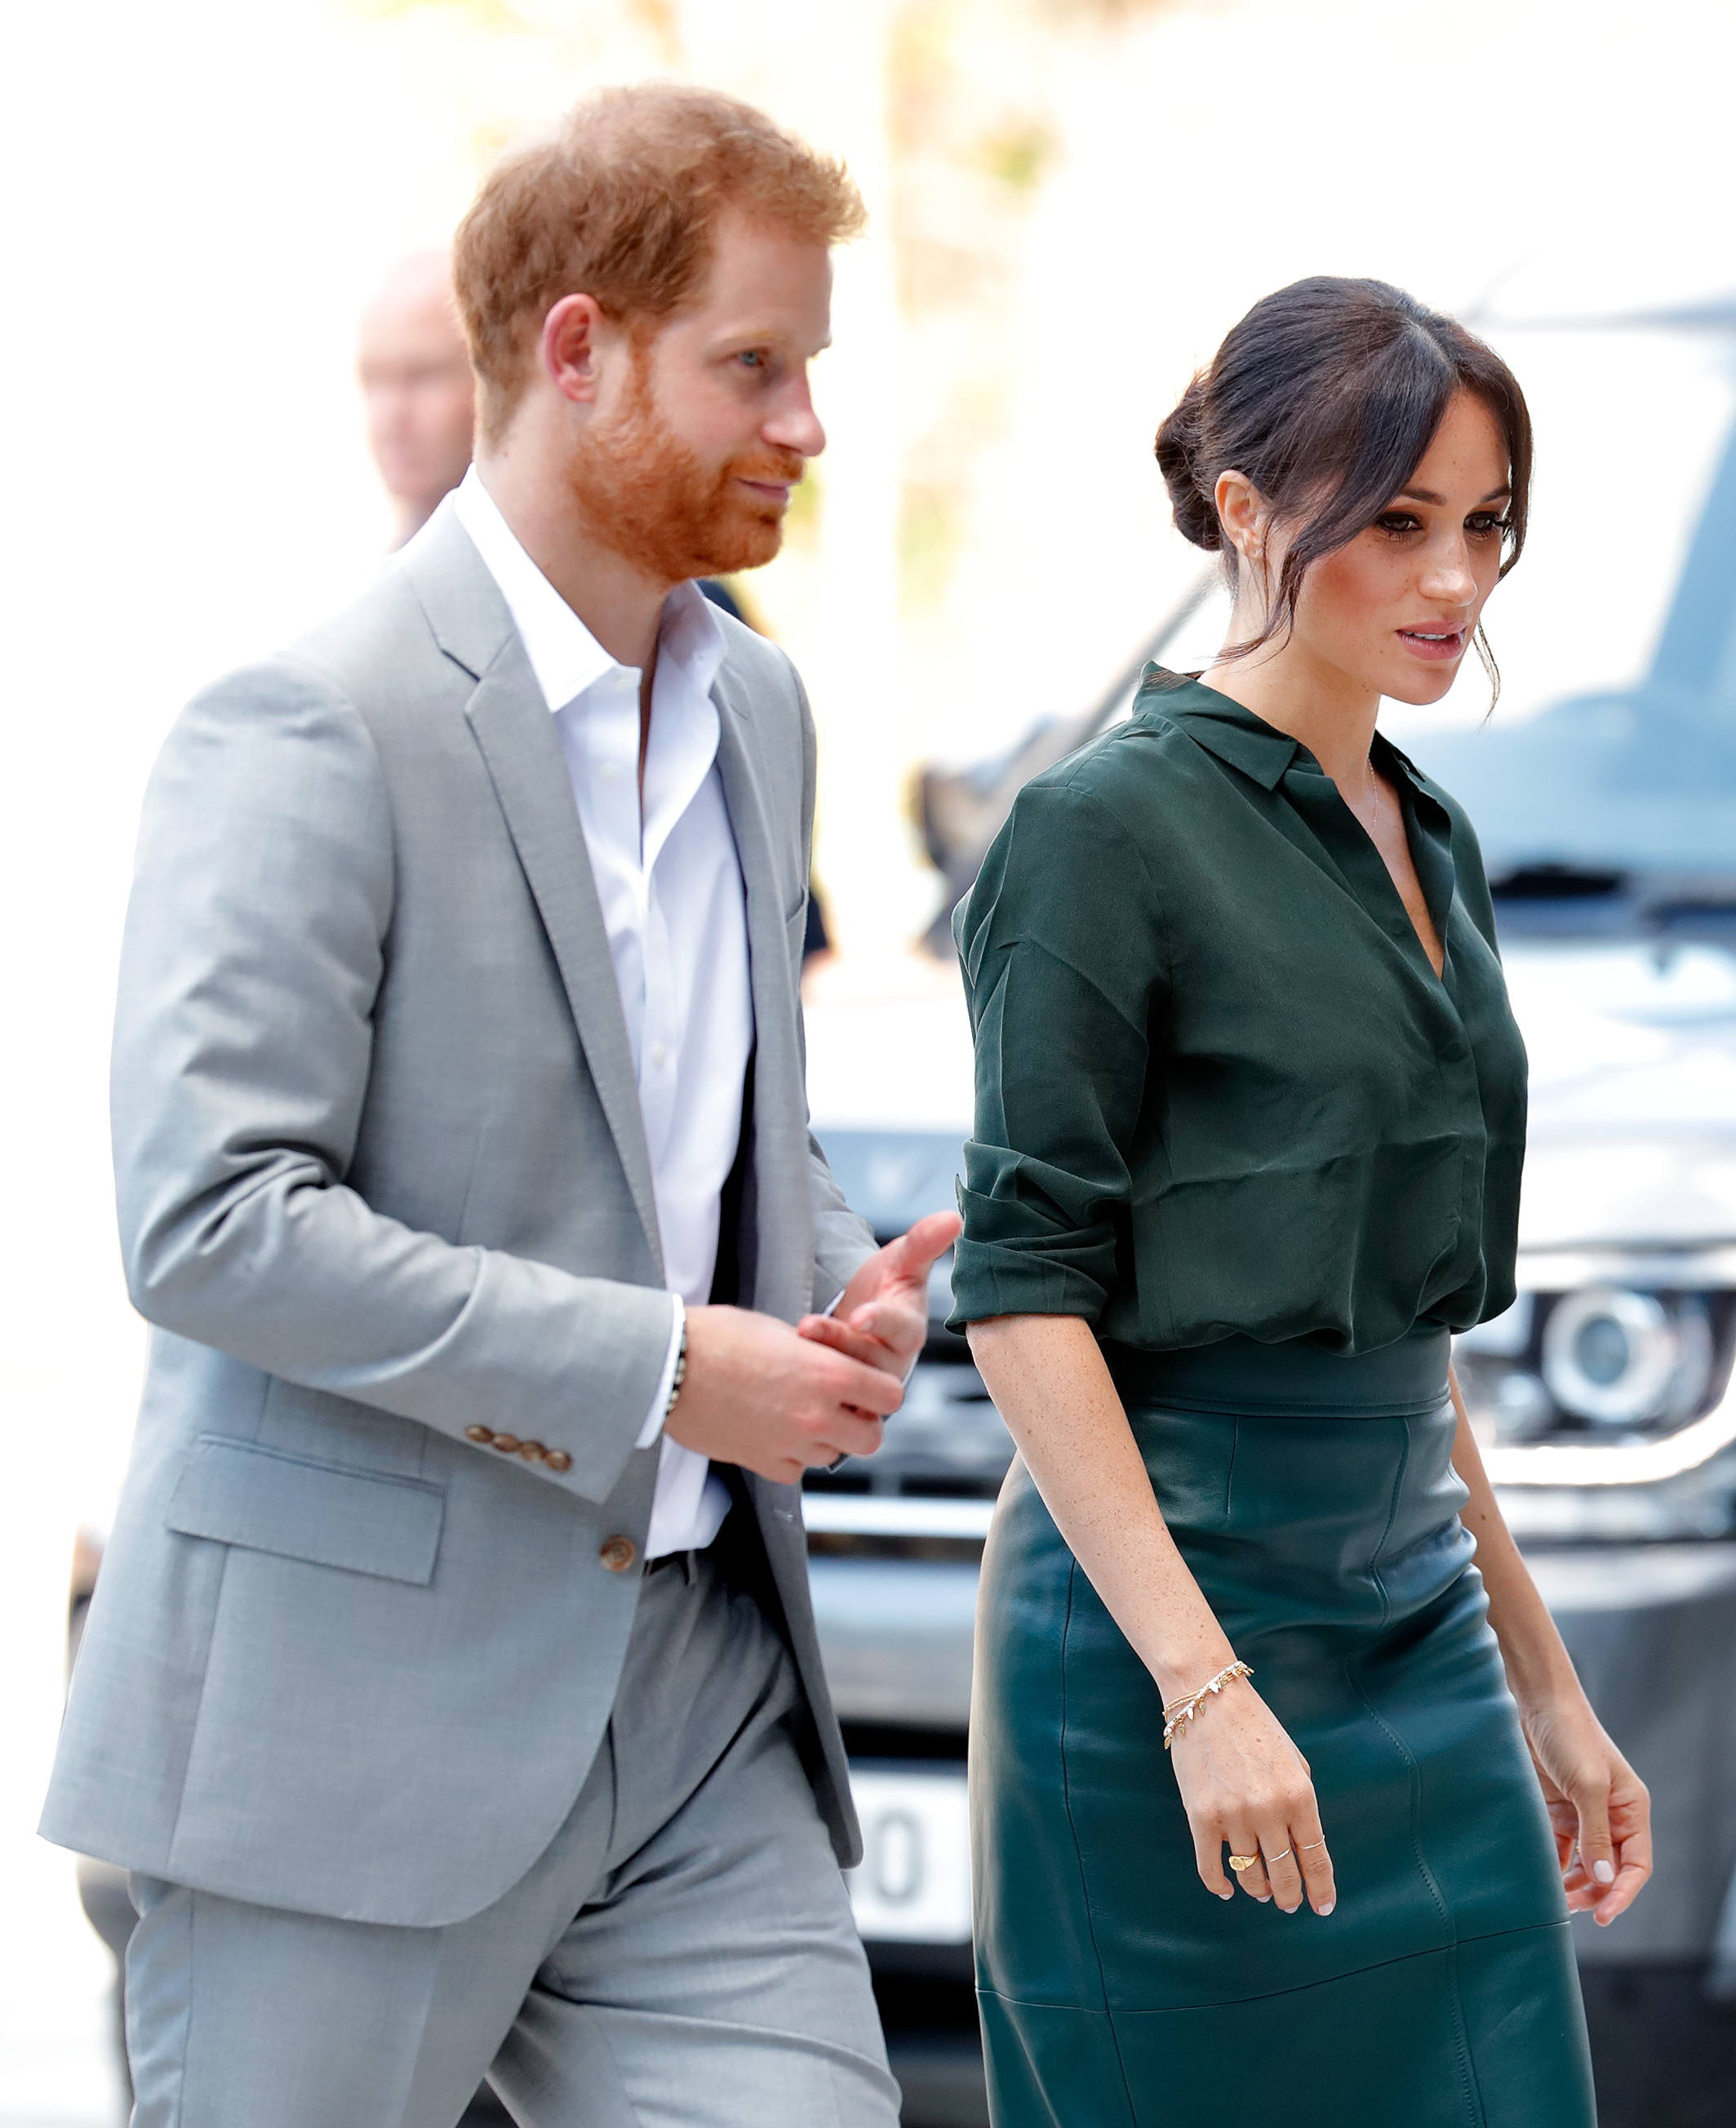 Meghan Markle and Prince Harry visiting the University of Chichester's Engineering and Technology Park in Bognor Regis, England on October 3, 2018 | Source: Getty Images